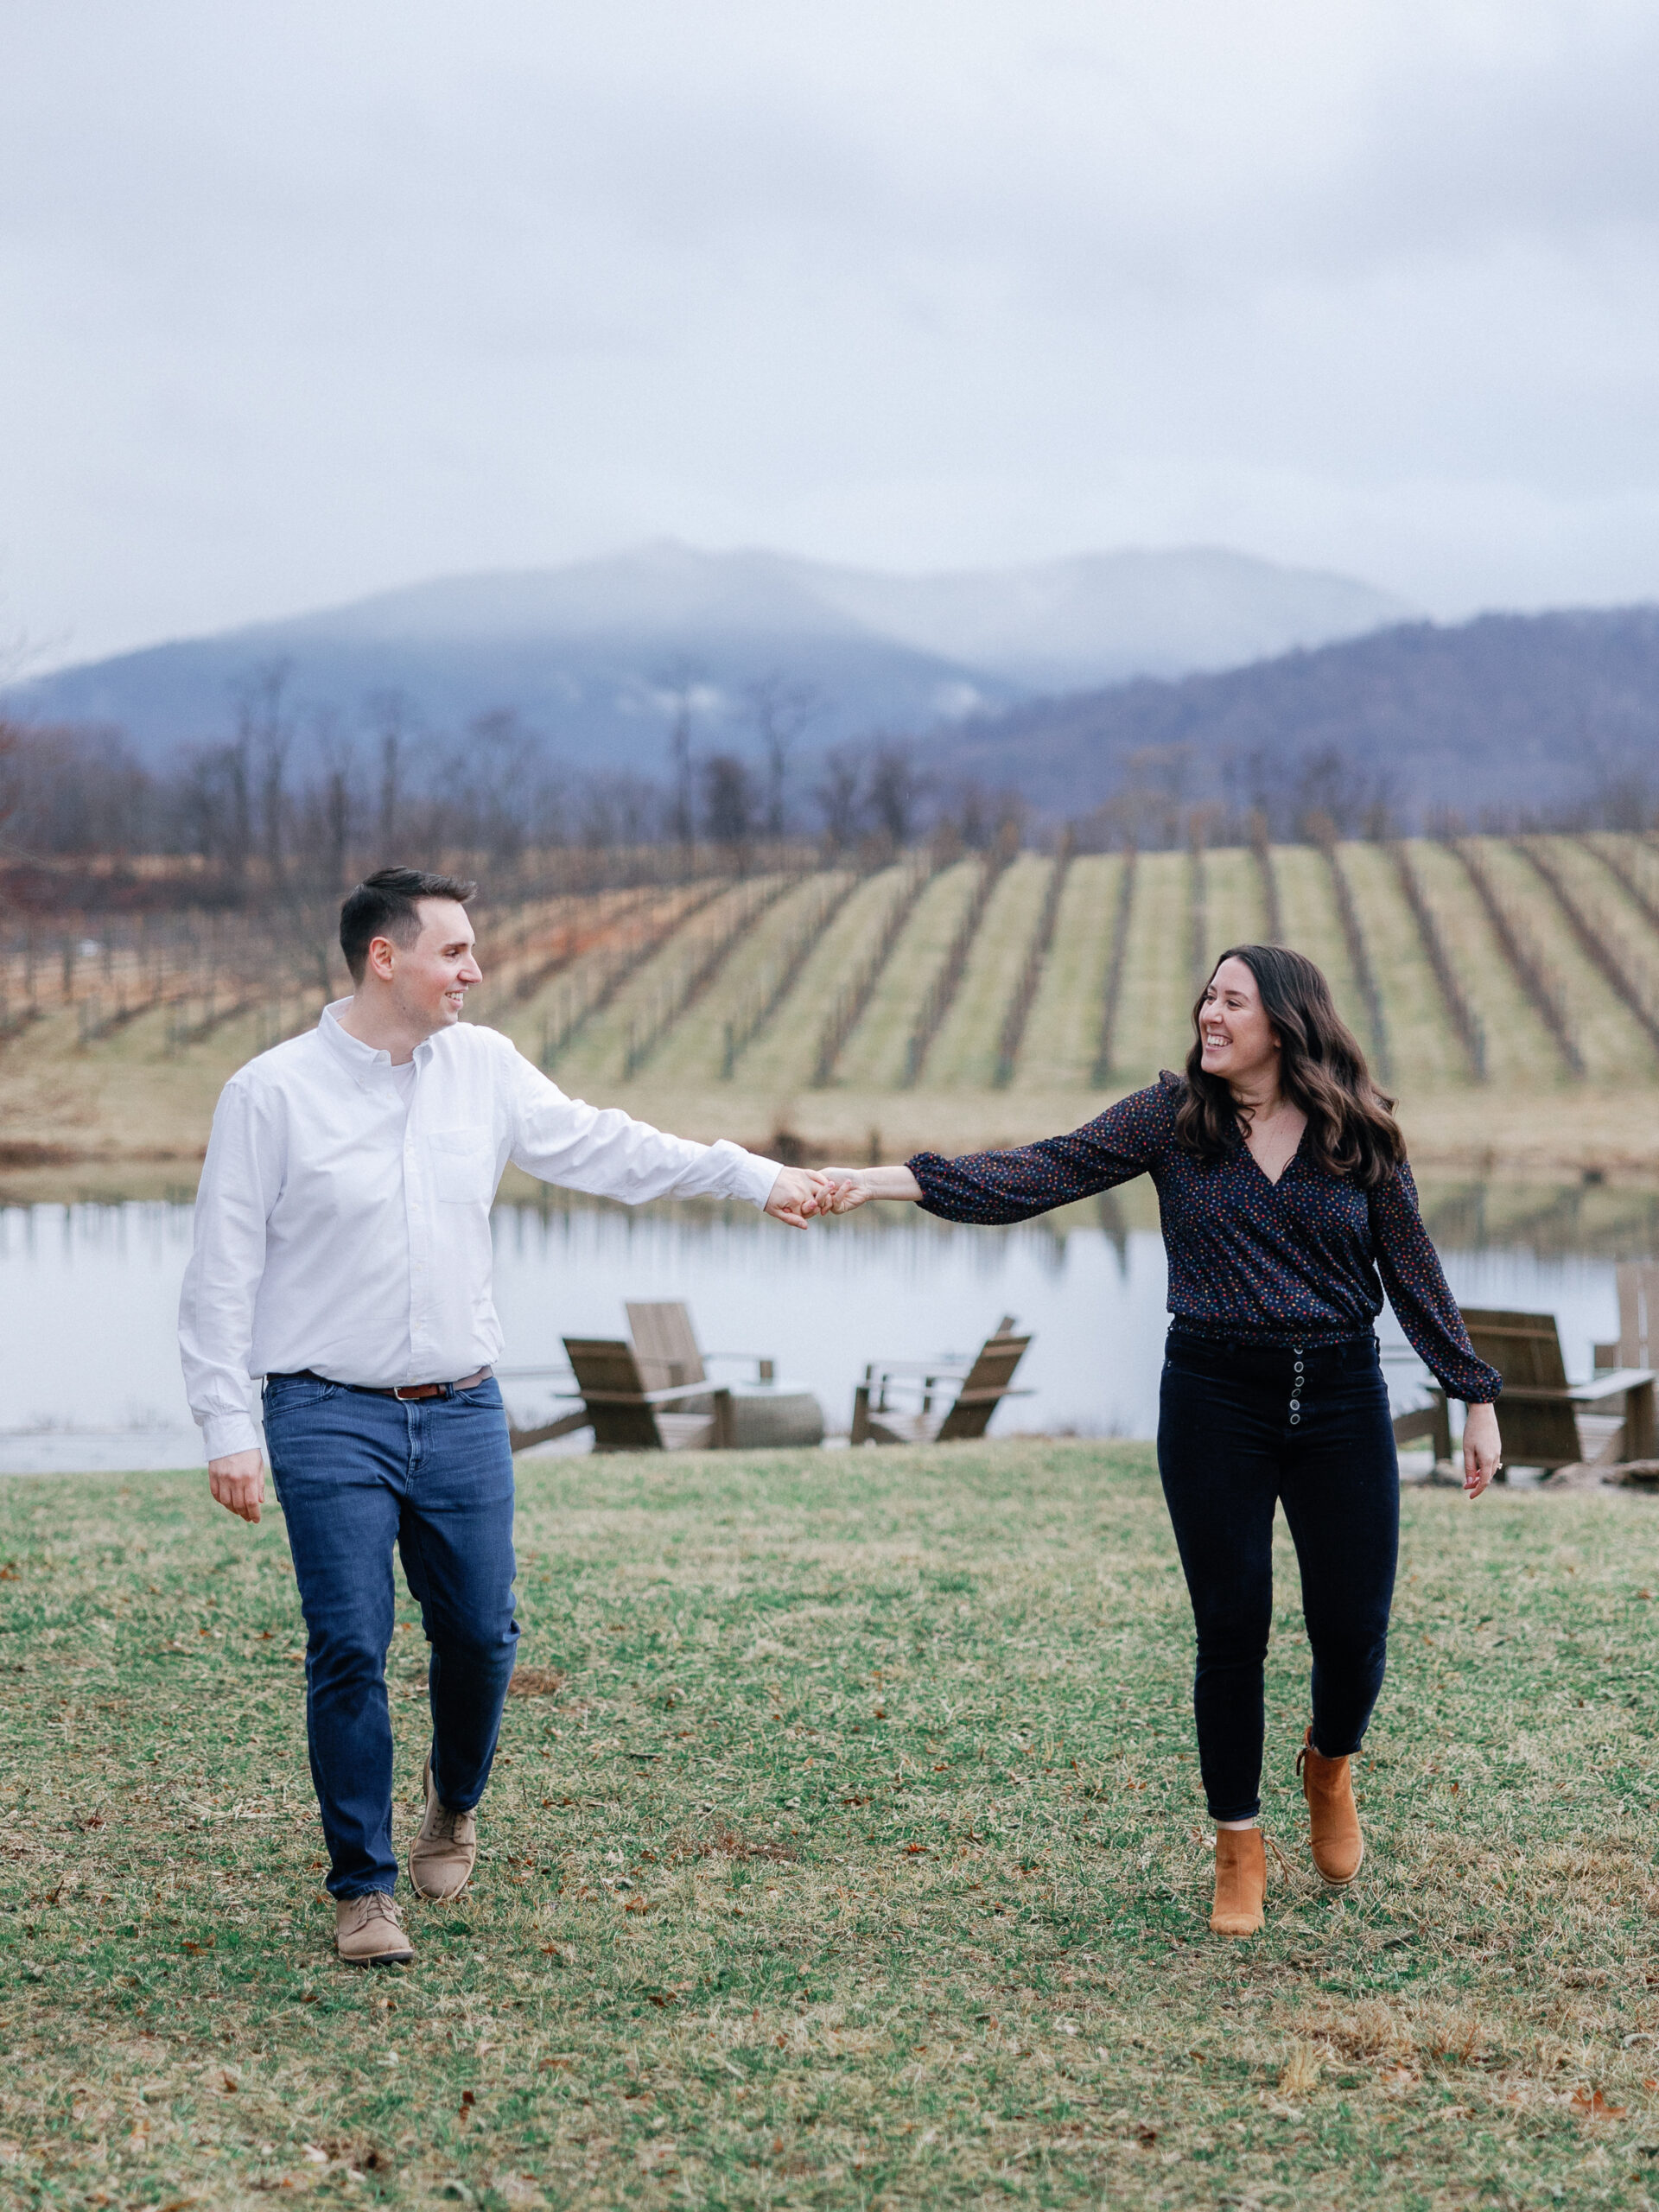 A couple holding hands in front of mountains in virginia